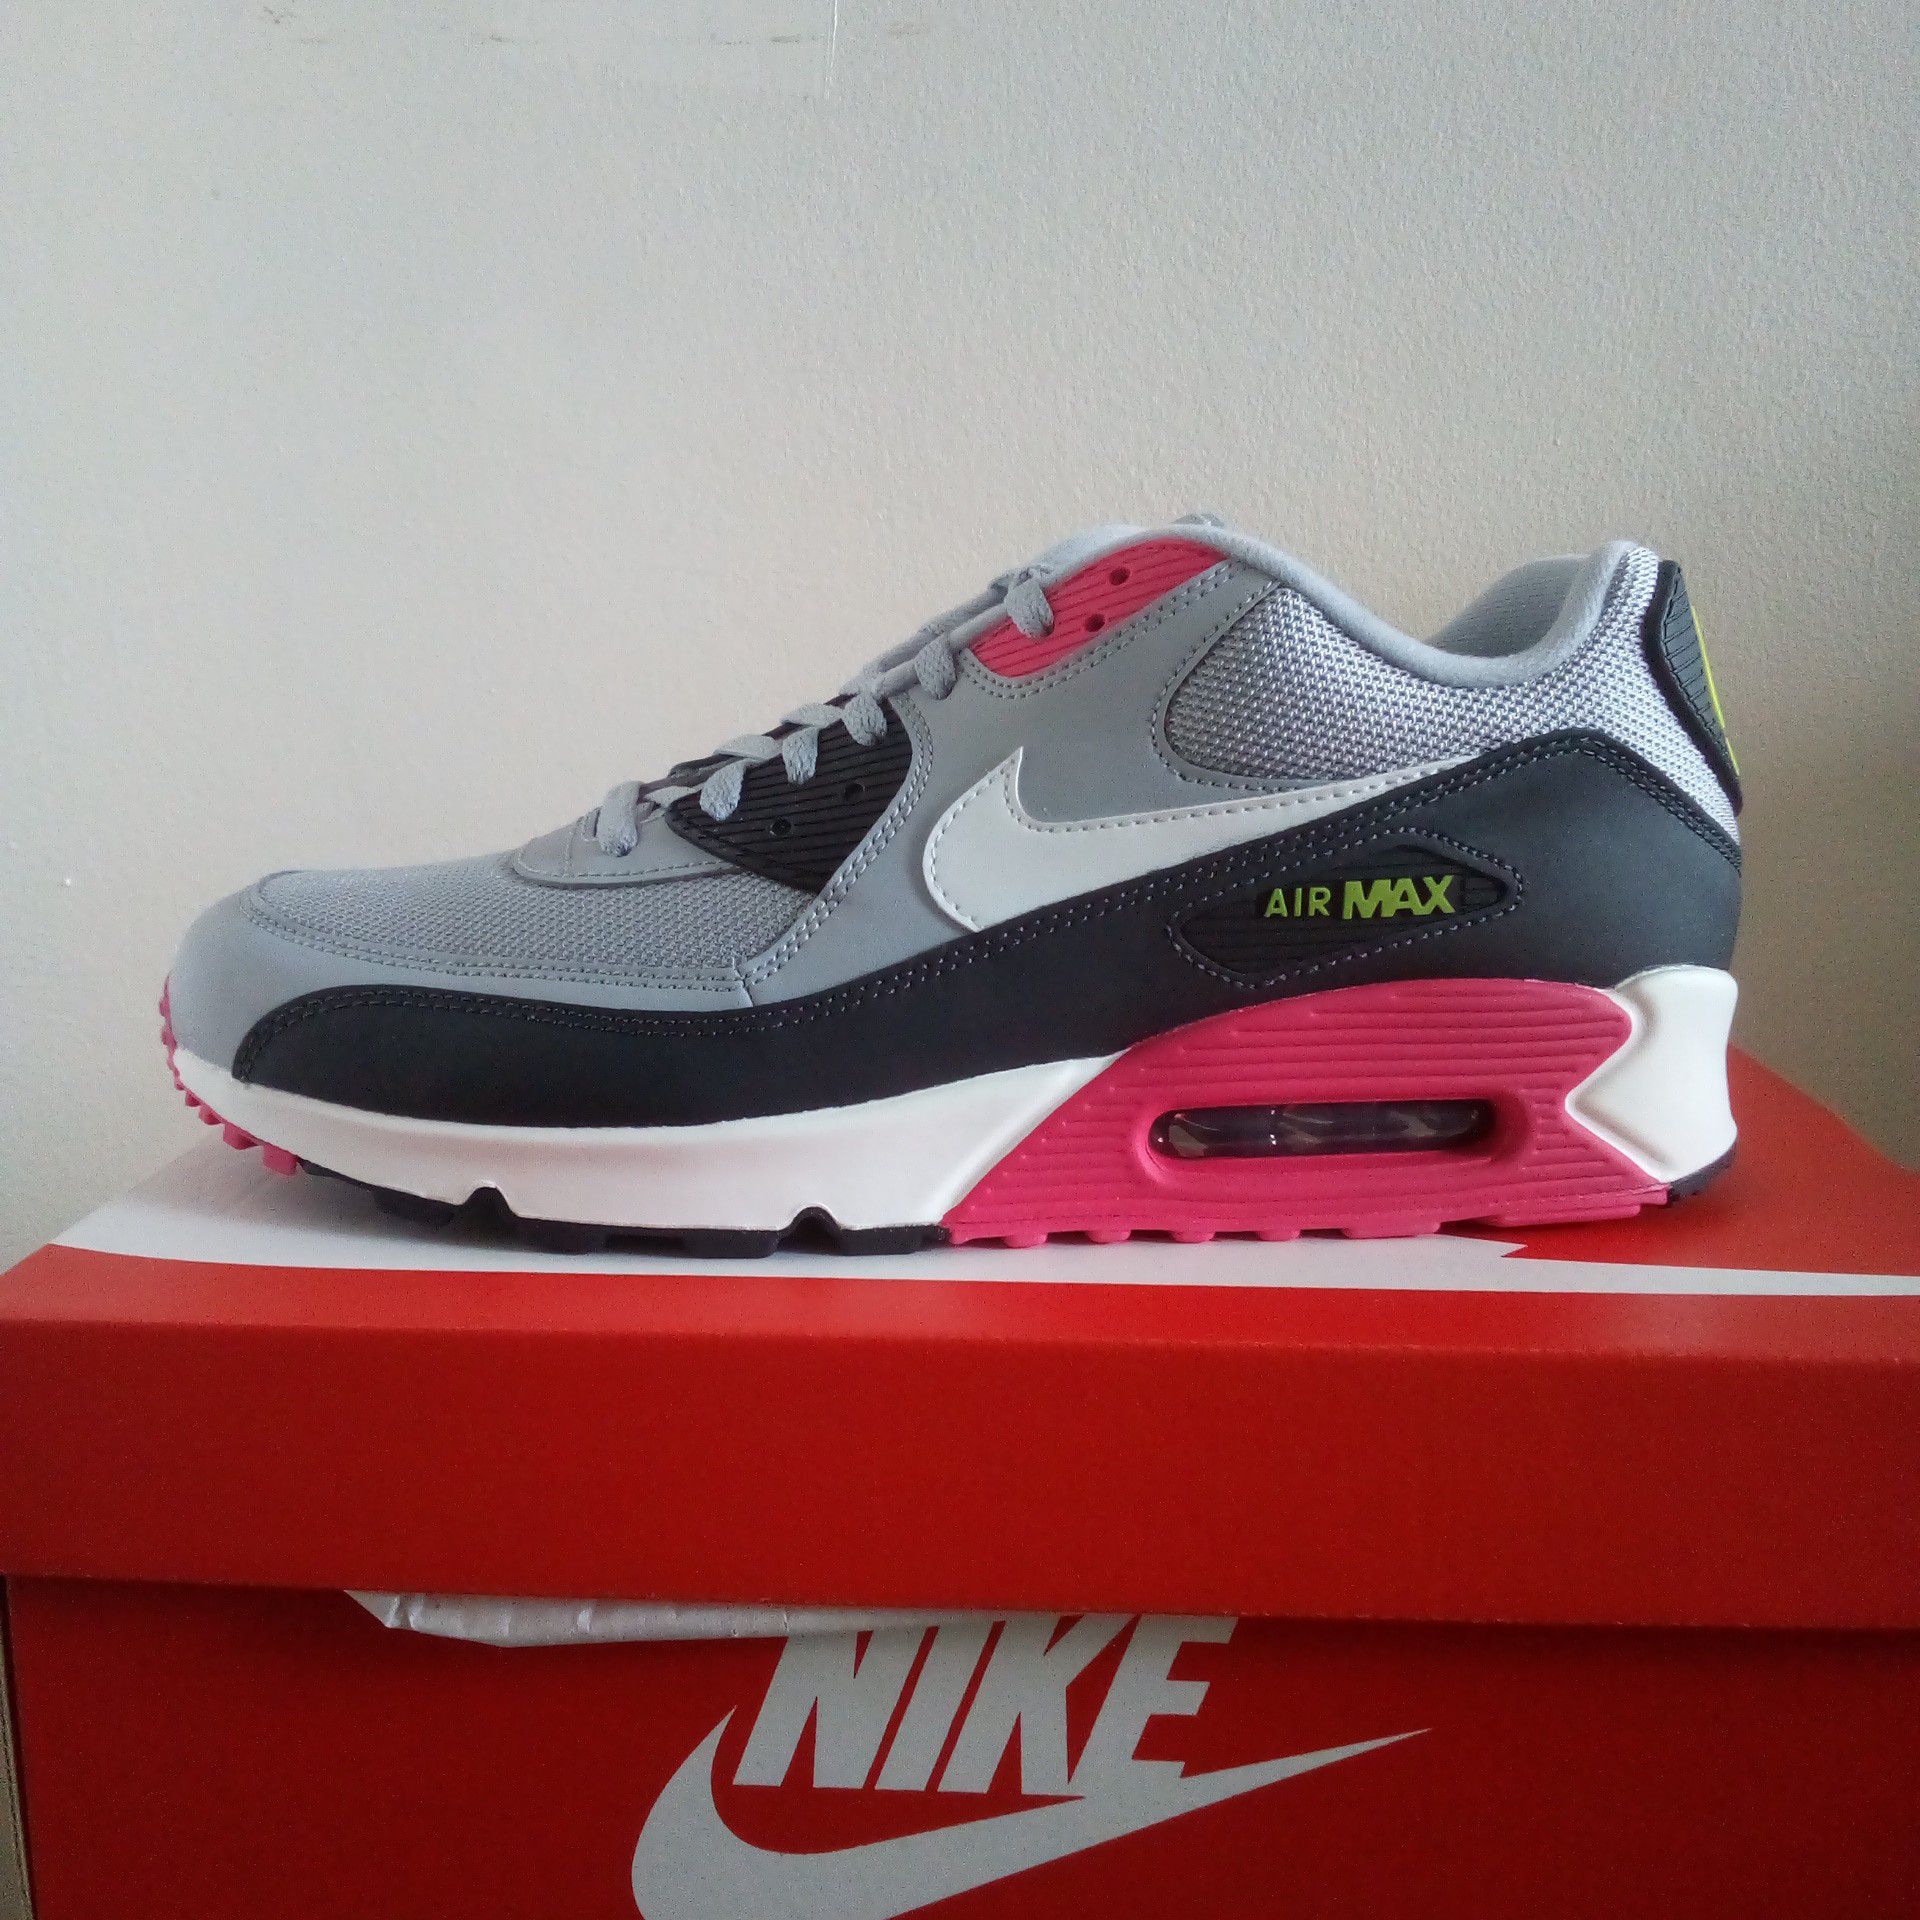 Air Max 90 Essential Sizes 10, 11 & 11.5 Brand New